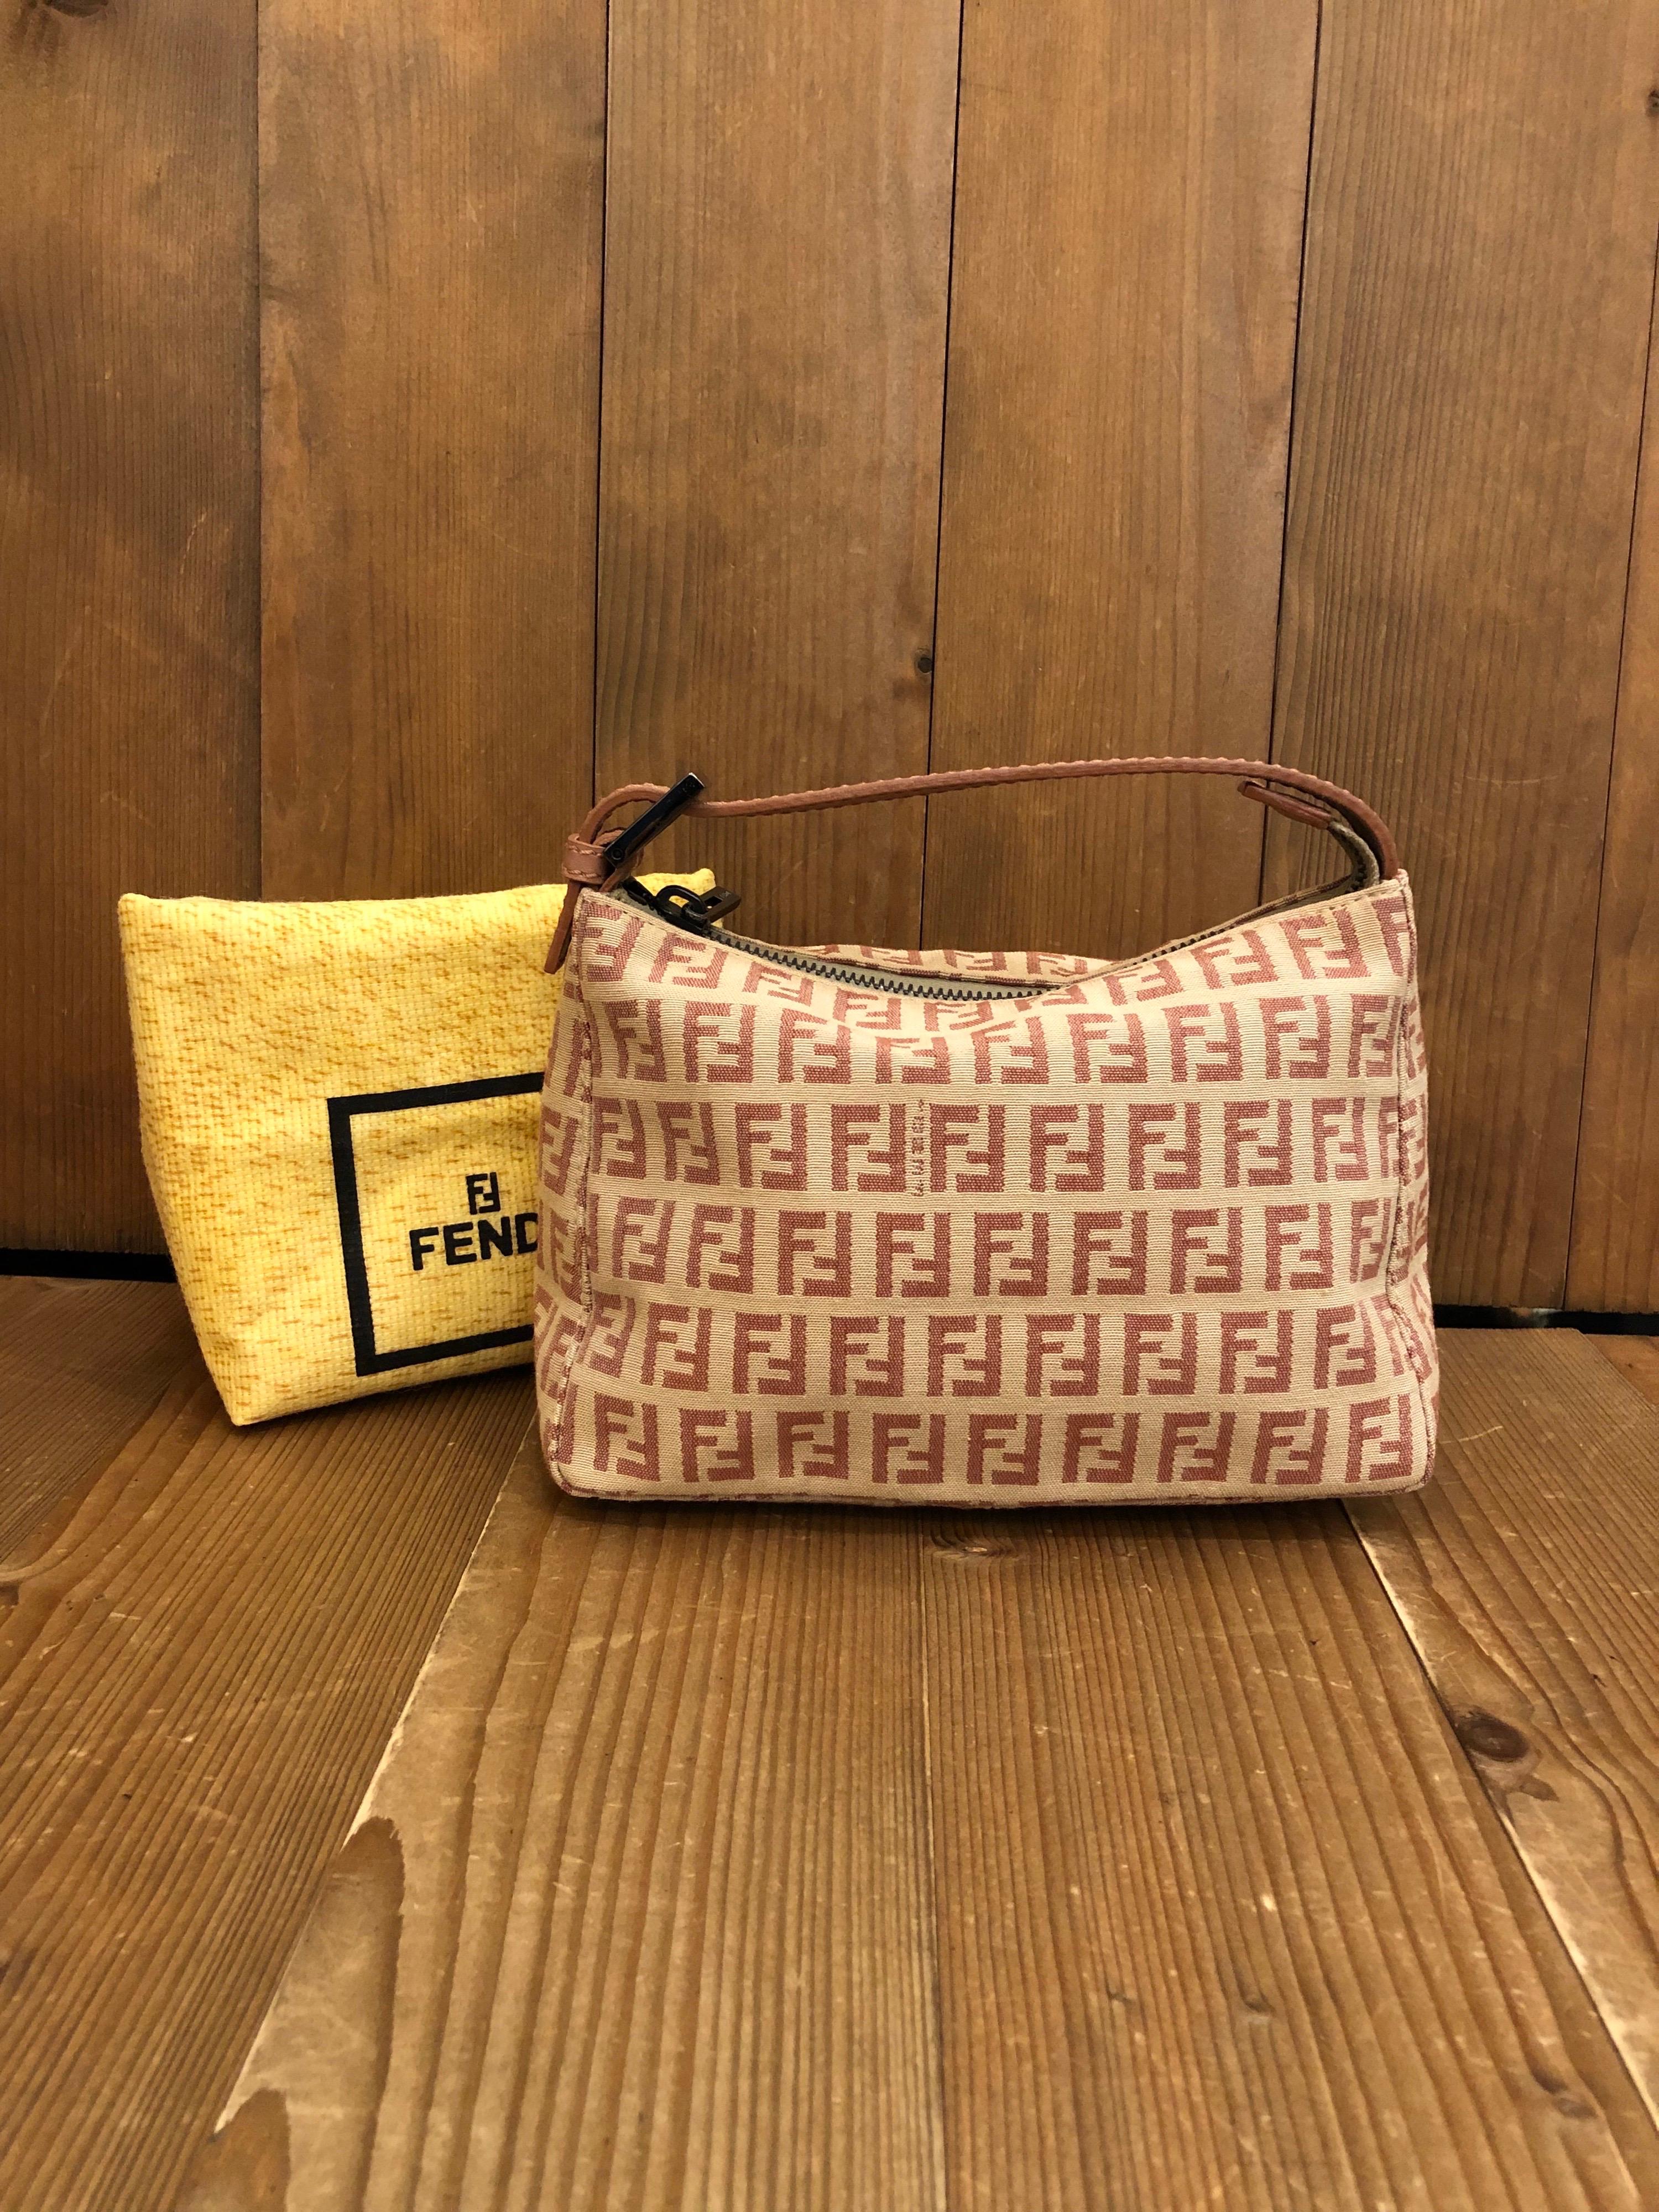 1990s Fendi mini pouch handbag in pink/beige Zucchino jacquard. Zipper top closure. Made in Italy. Measures 7.5 x 5 x 3.25 inches (fits plus-sized iPhone). Come with dust bag. 

Condition: Some signs of wear on lining consistent with age. Exterior